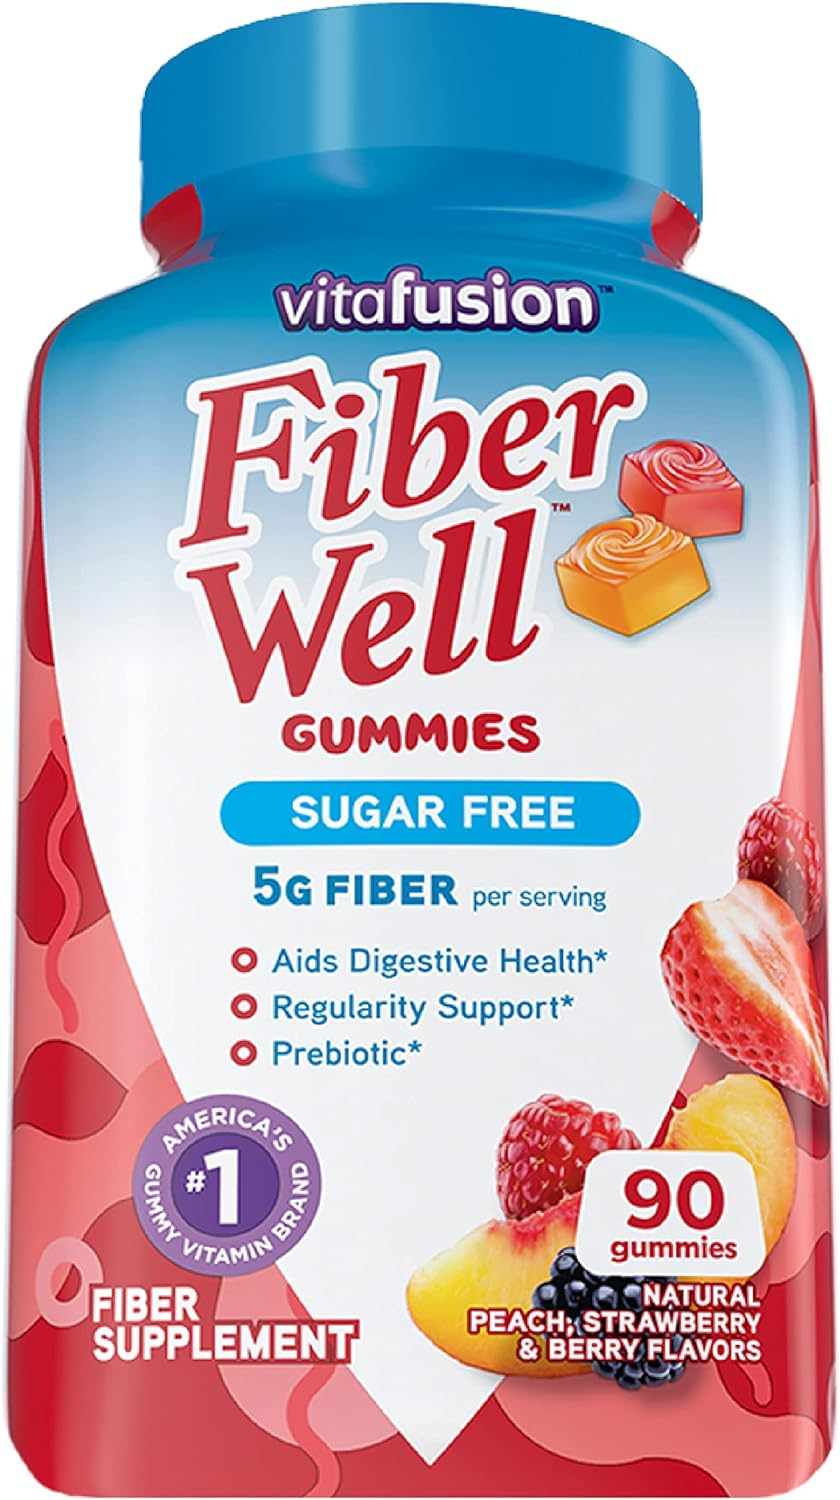 Vitafusion Fiber Well Fit Gummies Supplement, 90 Count (Packaging May Vary)  Fiber Well Sugar Free Fiber Supplement, Peach, Strawberry and BlackBerry Flavored Supplements, 90 Count